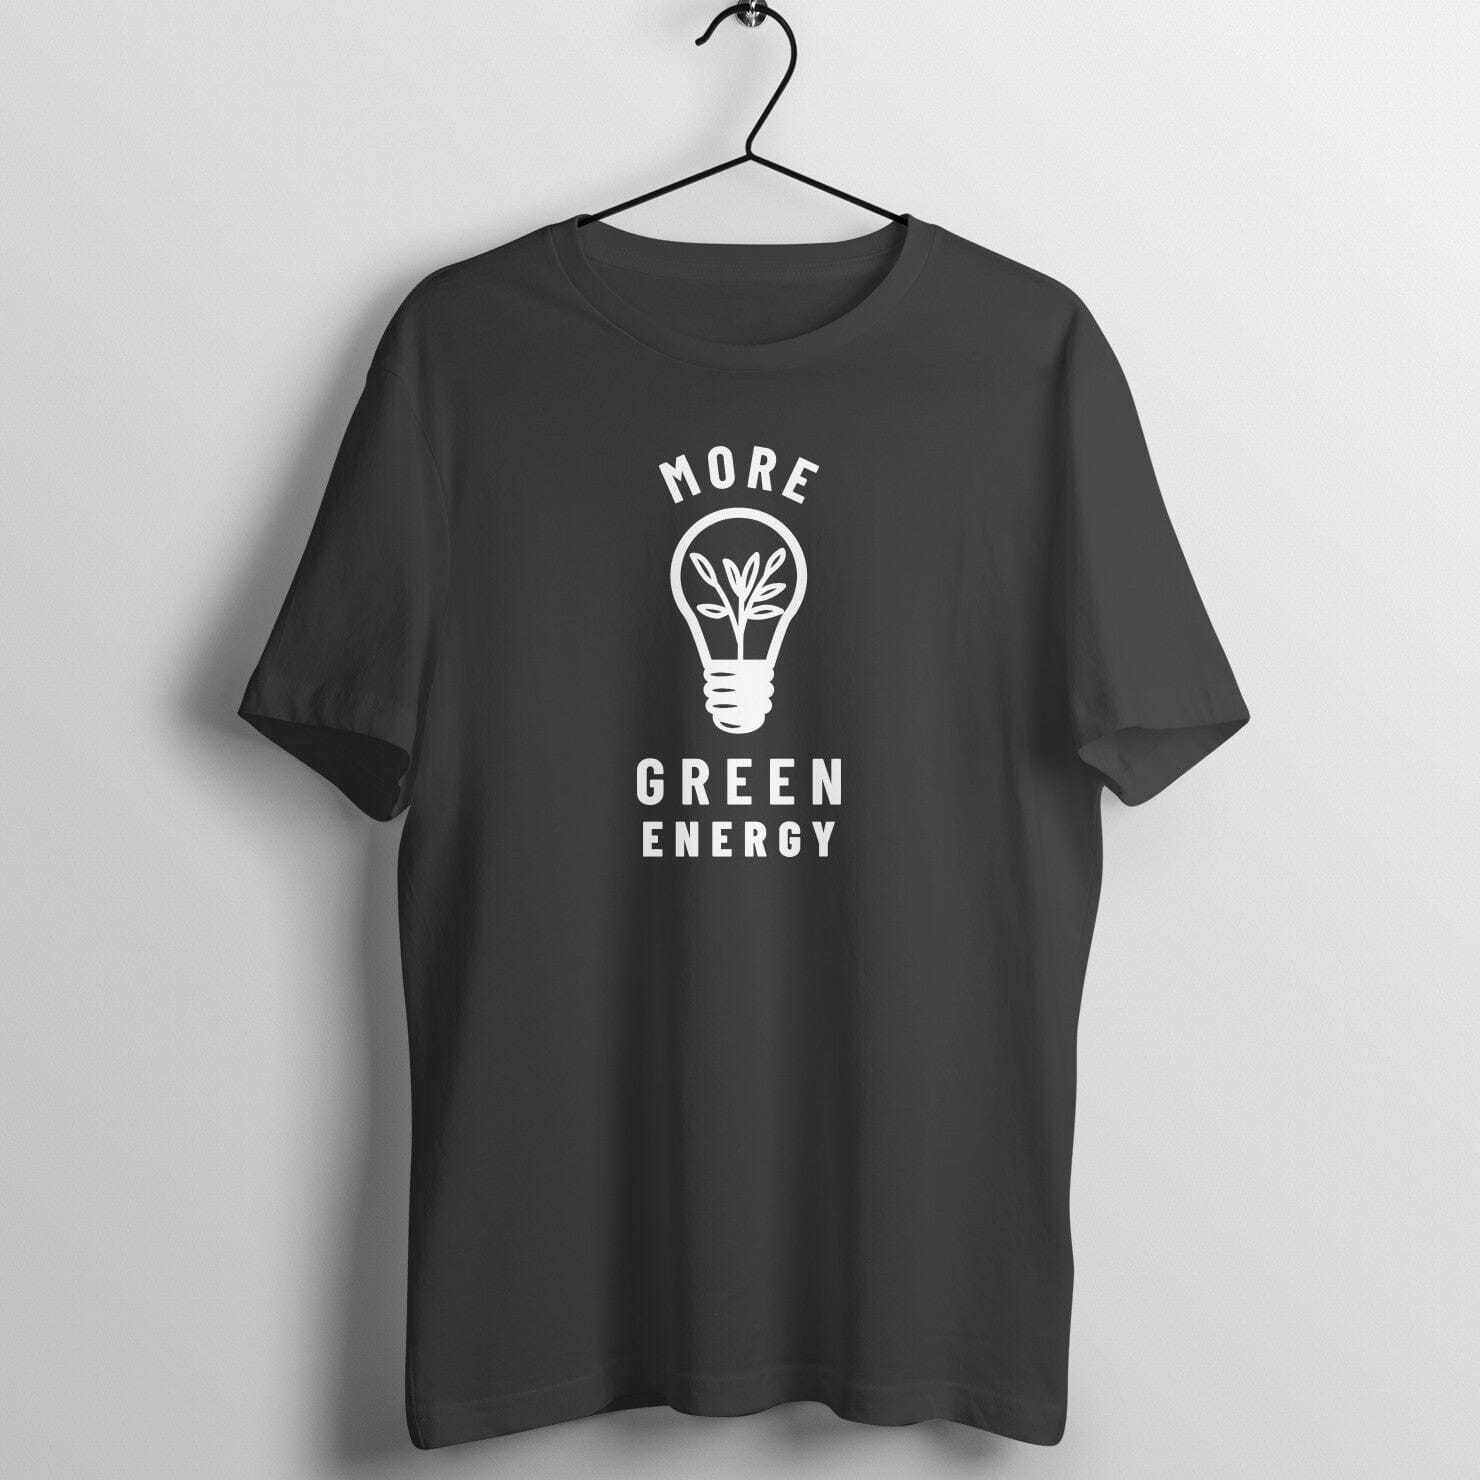 More Green Energy Exclusive Black T-shirt for Men and Women Printrove Black S 